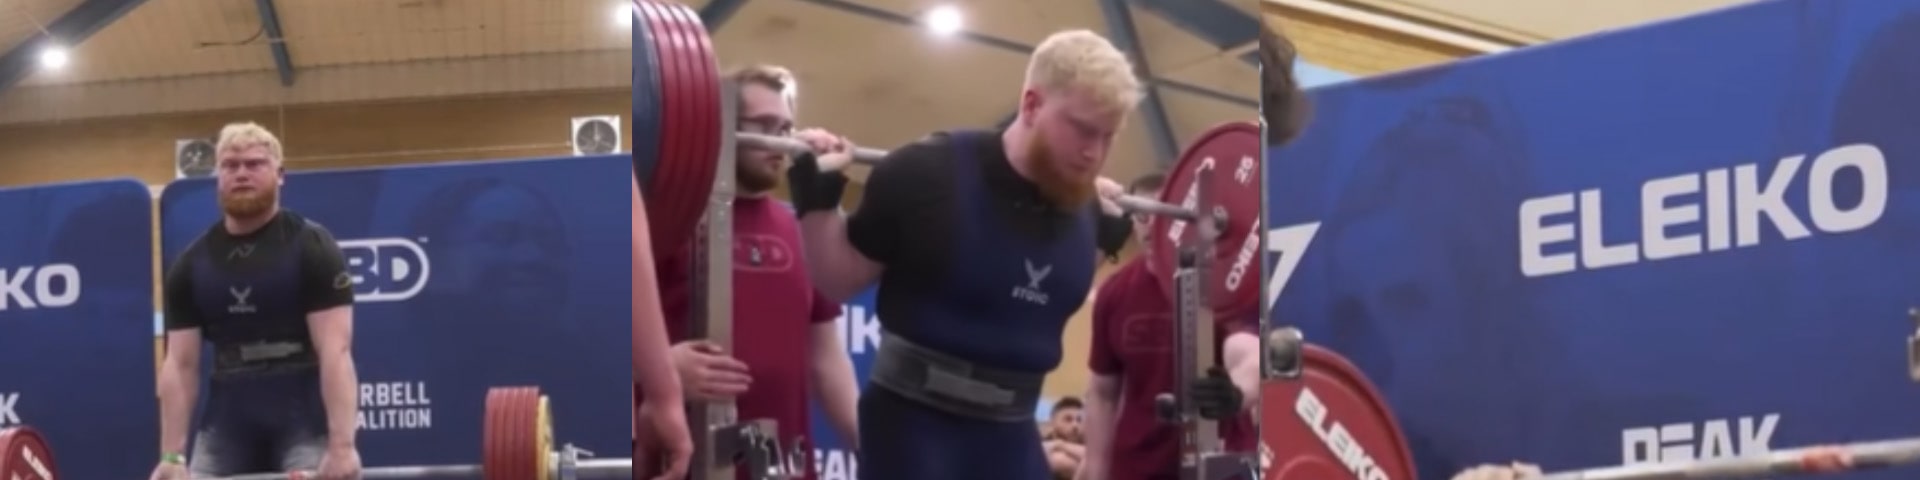 A Solent student powerlifting.